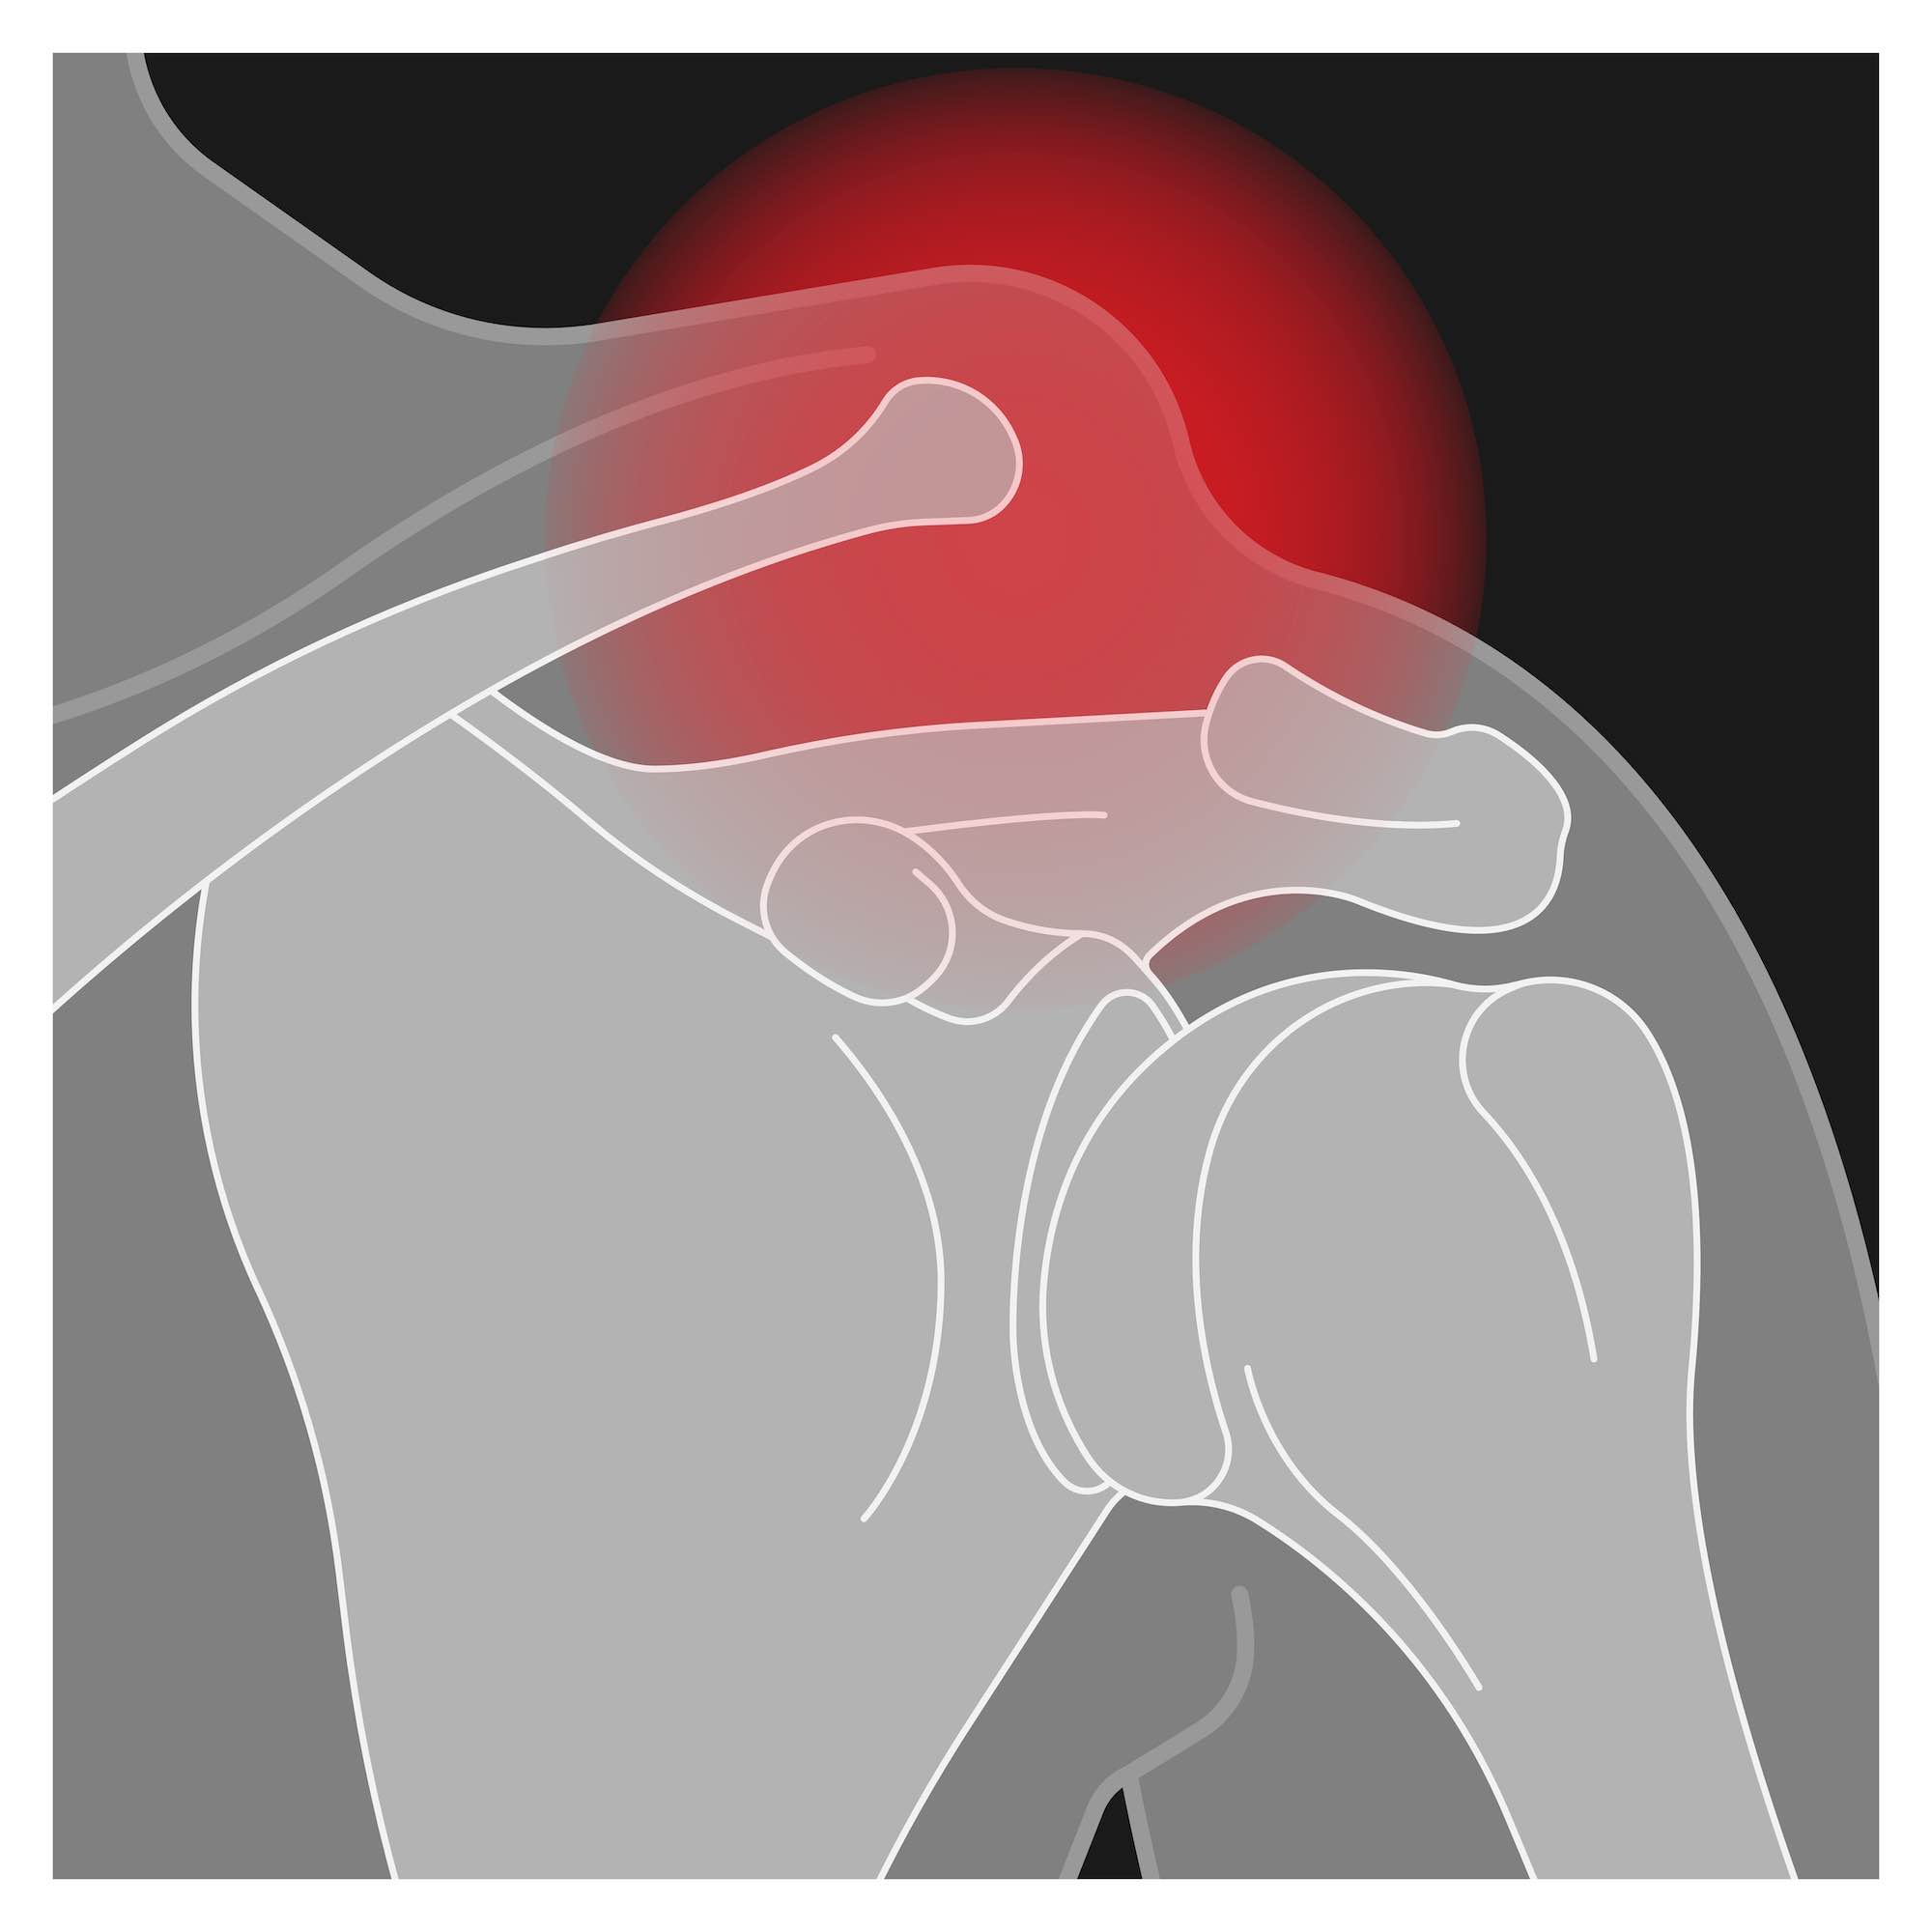 The (Acromio-Clavicular) AC Joint: Common Conditions and Treatment Options